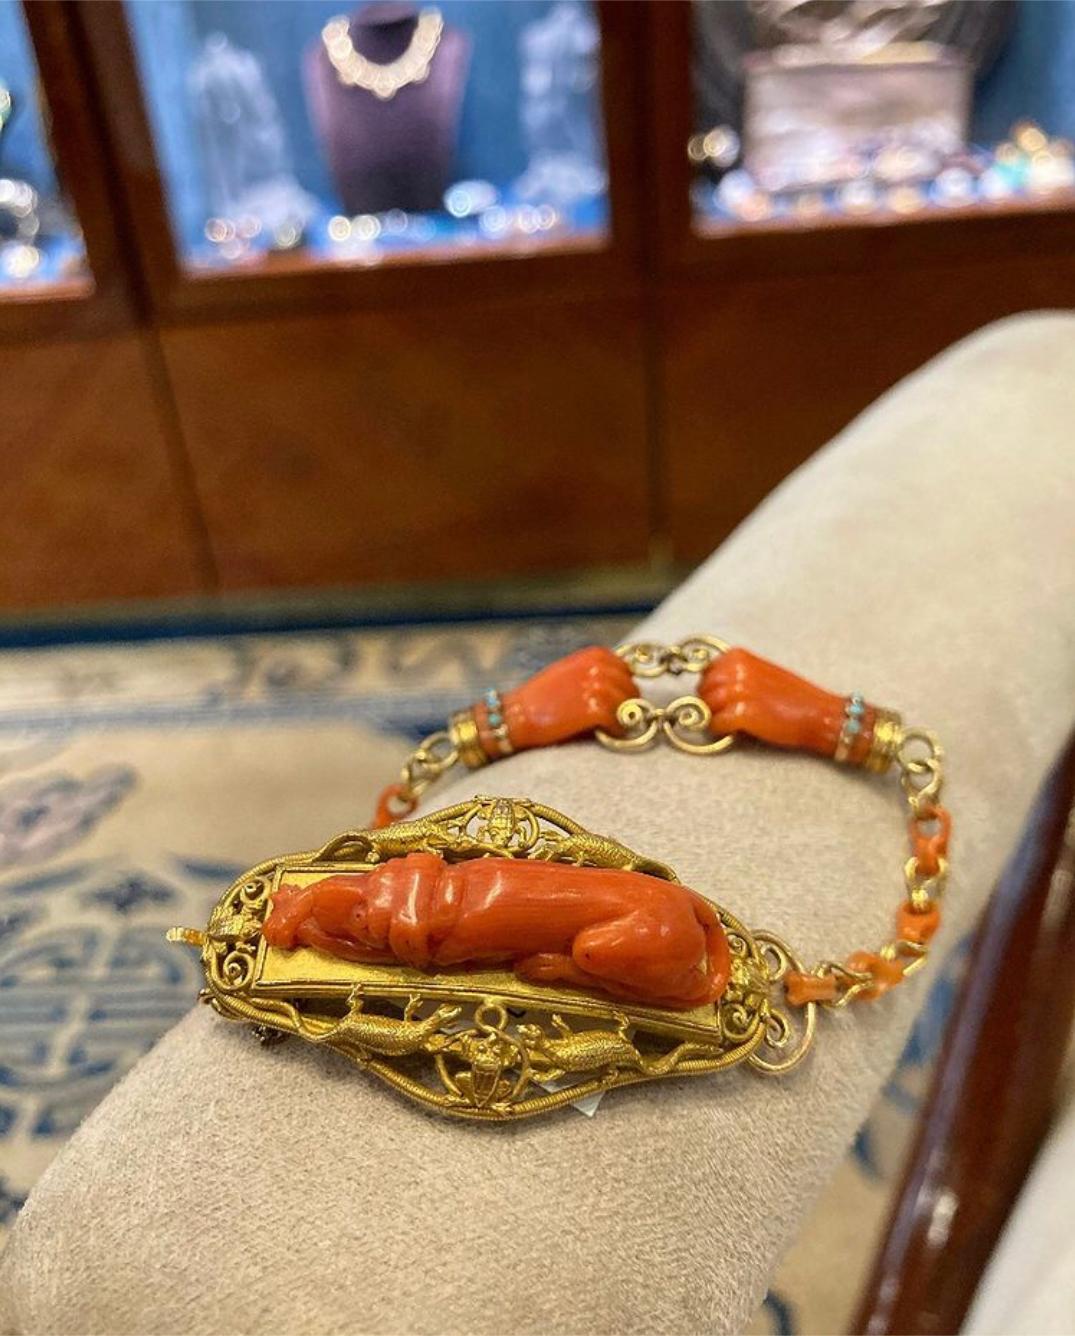 An antique nineteenth century carved coral hunting bracelet with turquoise embellishment, in yellow gold. Features a center panel depicting a hound accompanied by lizards and frogs, and a pair of clasped hands on the underside of the bracelet. Made